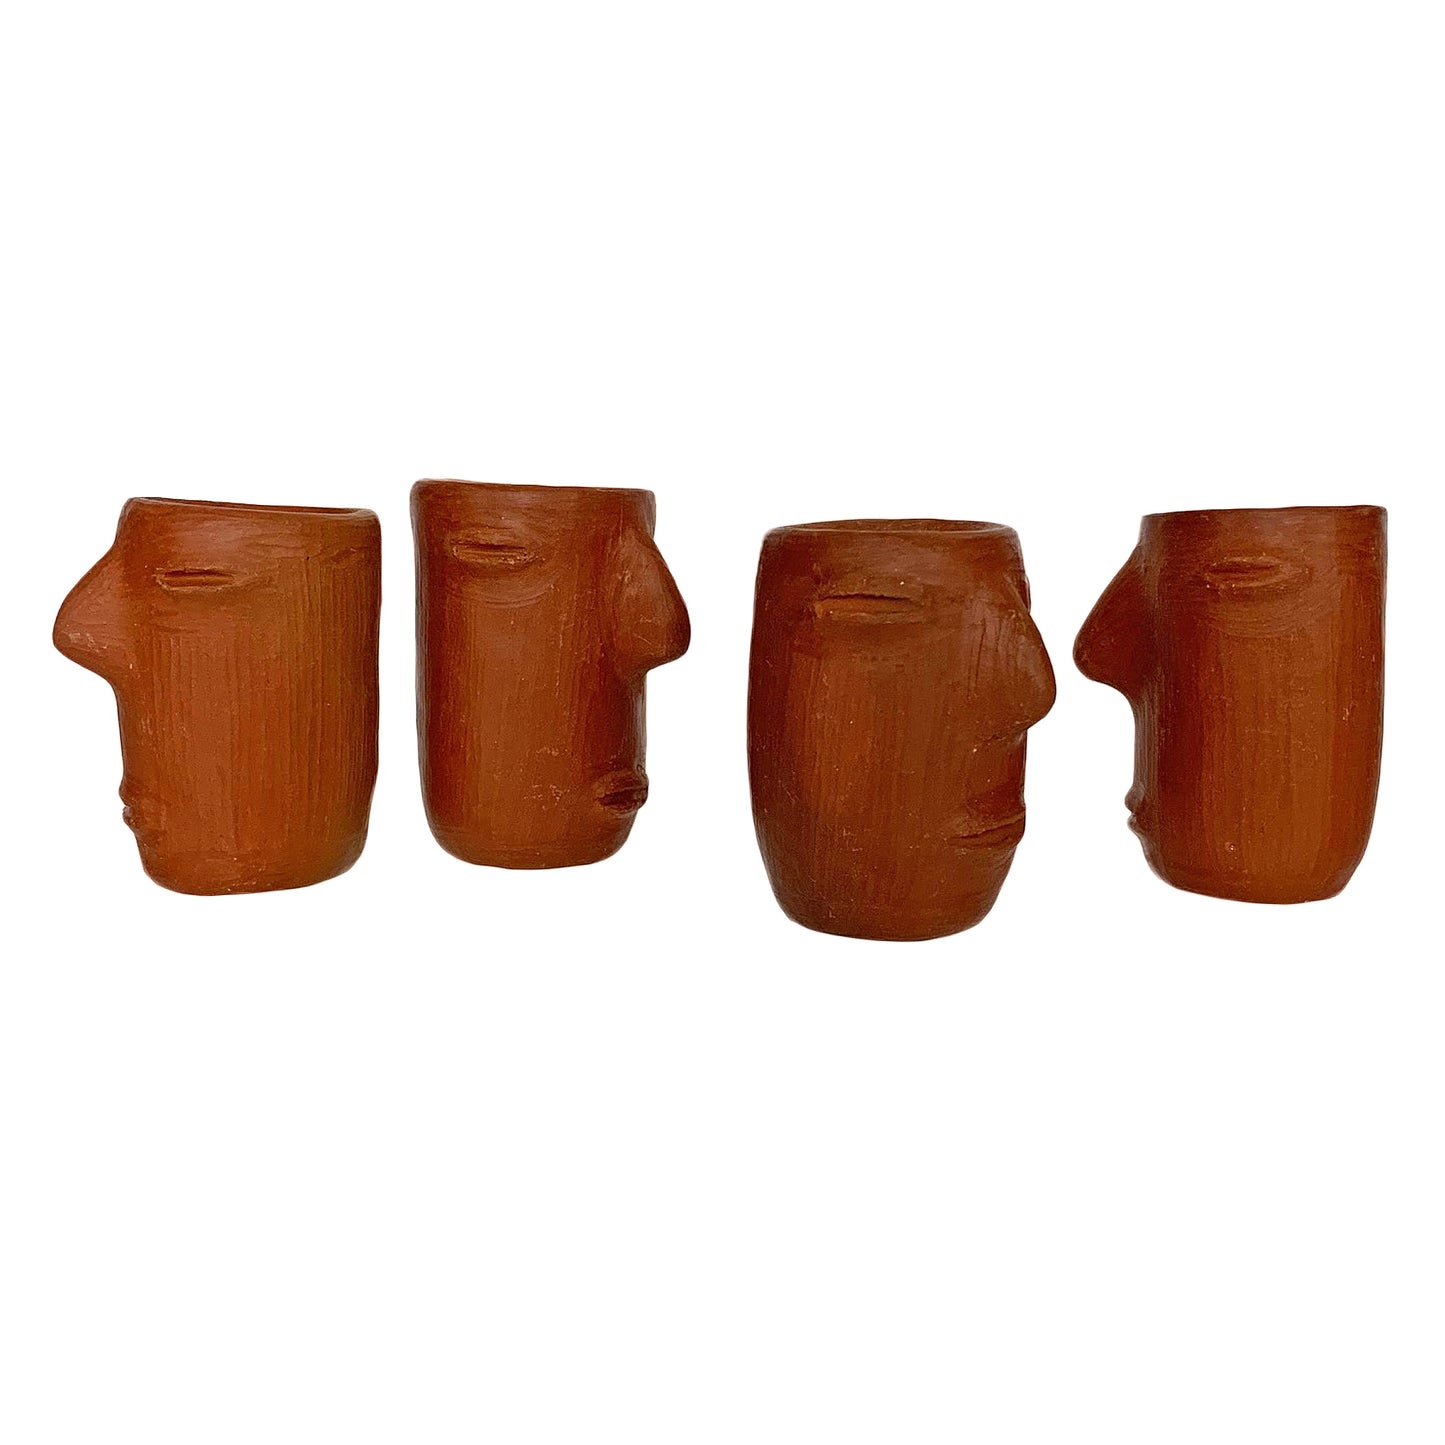 Red Clay Mezcal Shot Glasses with Faces | Mezcal Copitas - Handmade in Oaxaca, Mexico